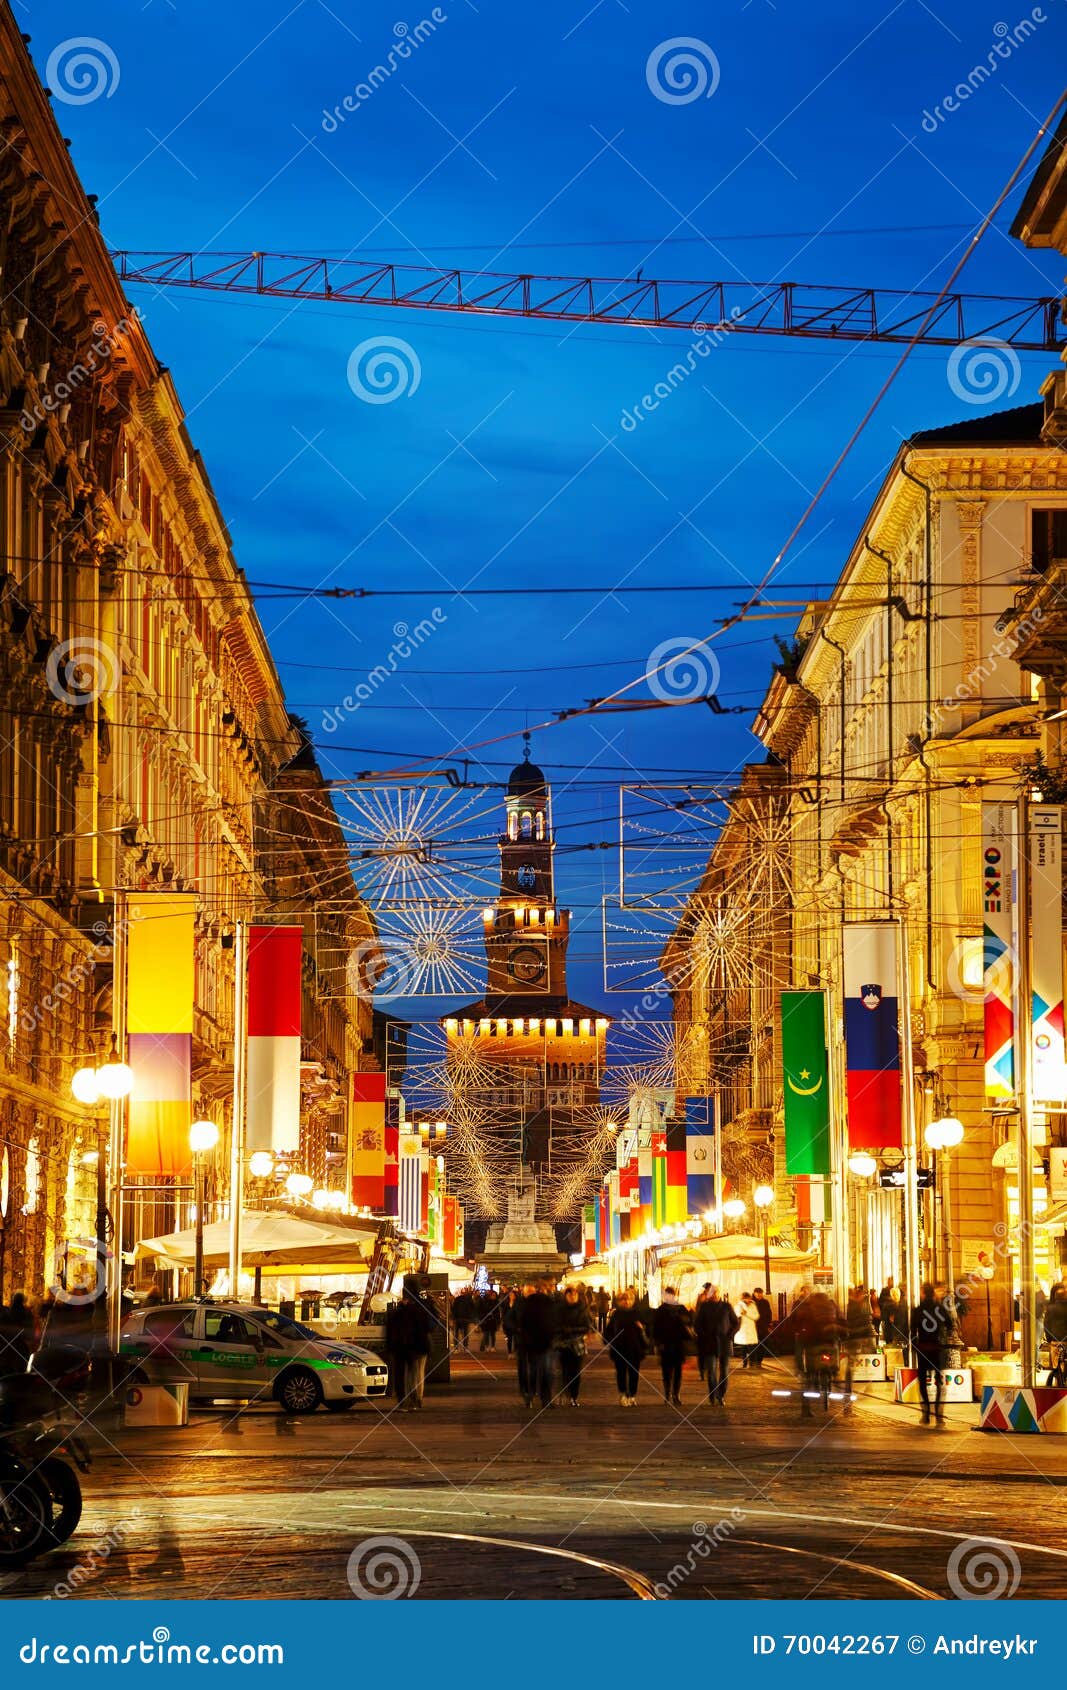 Via Dante Shopping Street With People At Night Editorial